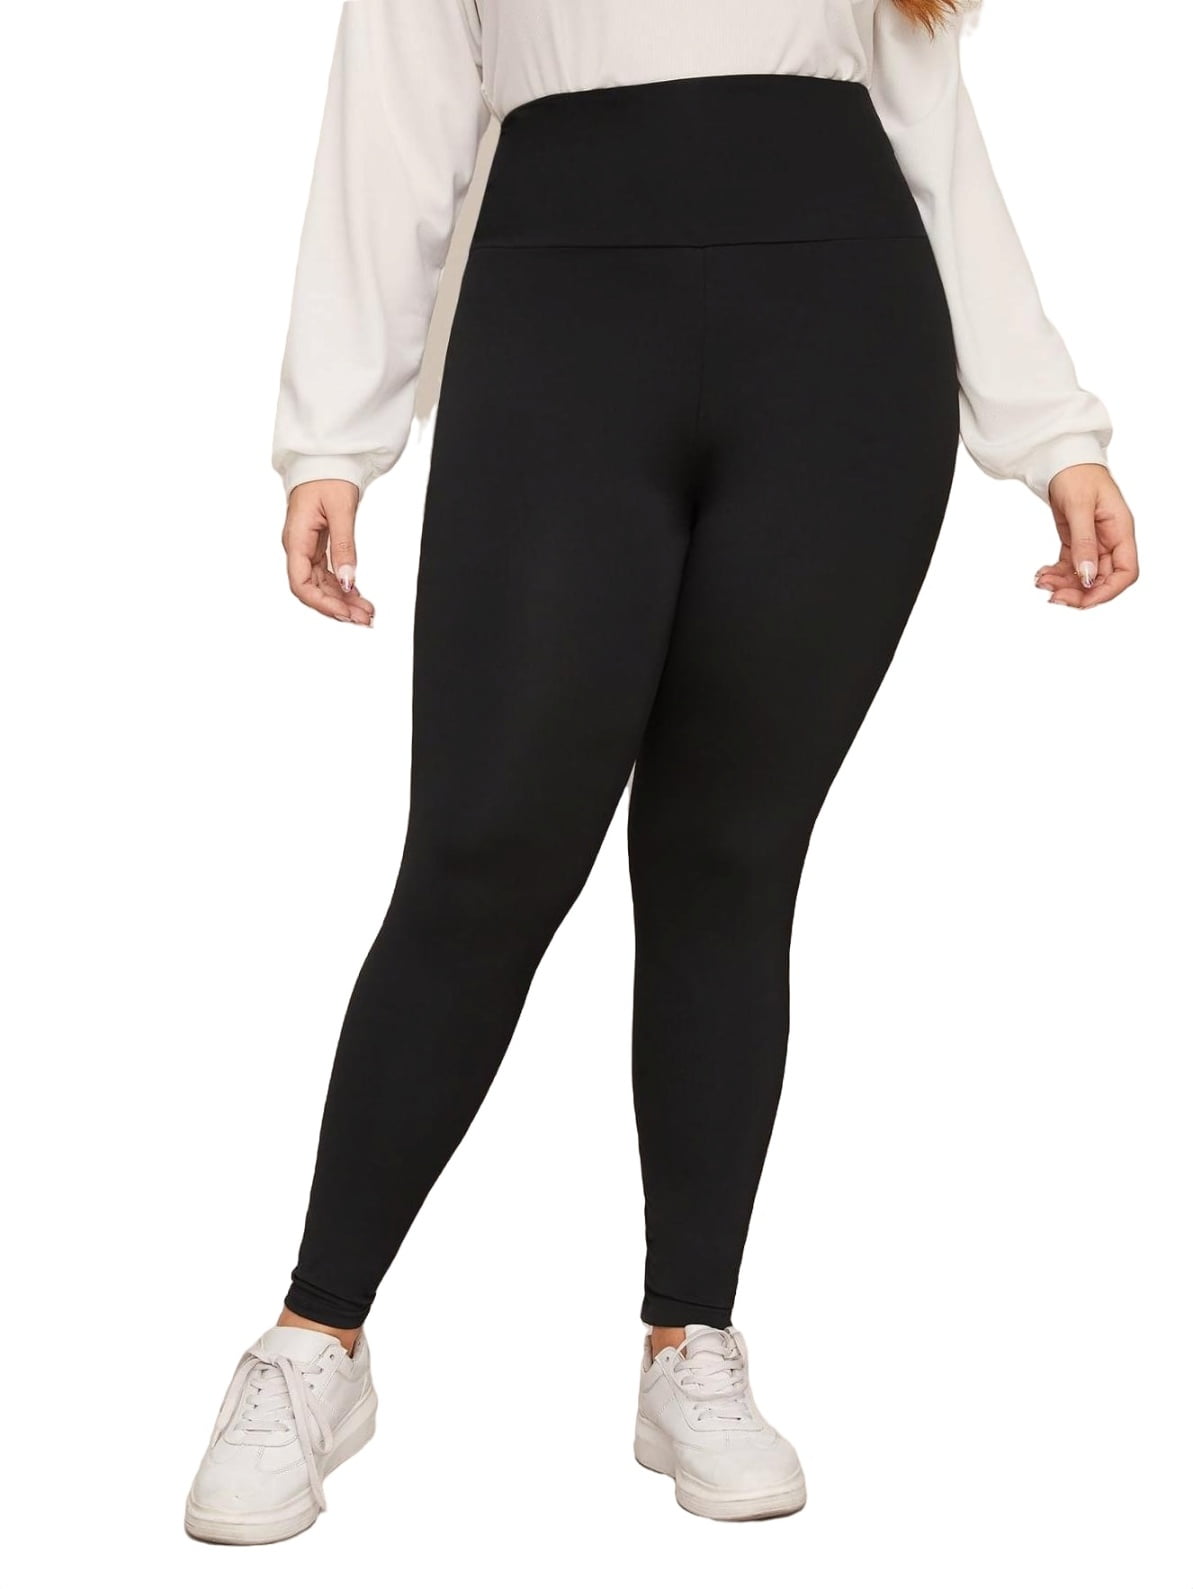 Women's Plus Size High Waist Stretchy Knot Front Solid Leggings Workout Gym  Yoga Pants 3XL(18)